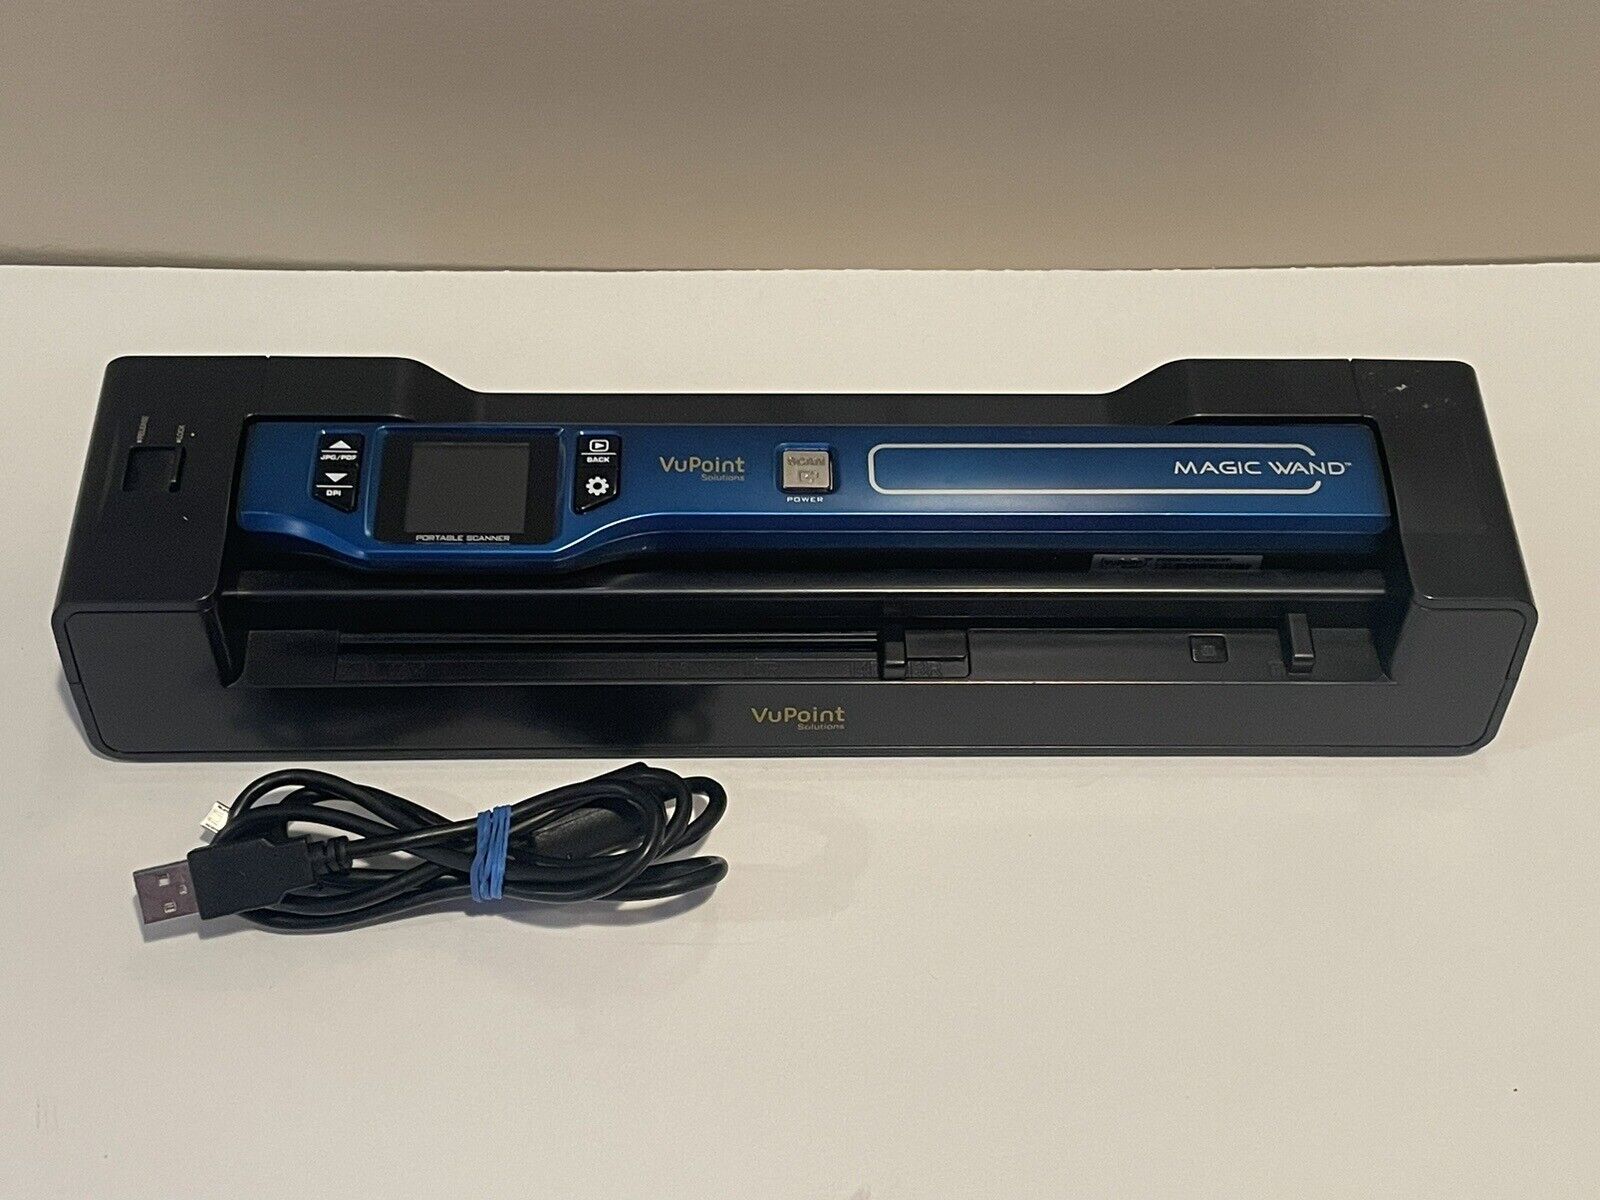 VuPoint Magic Wand Portable Scanner with Auto-Feed Dock PDSDK-ST470-VP Blue